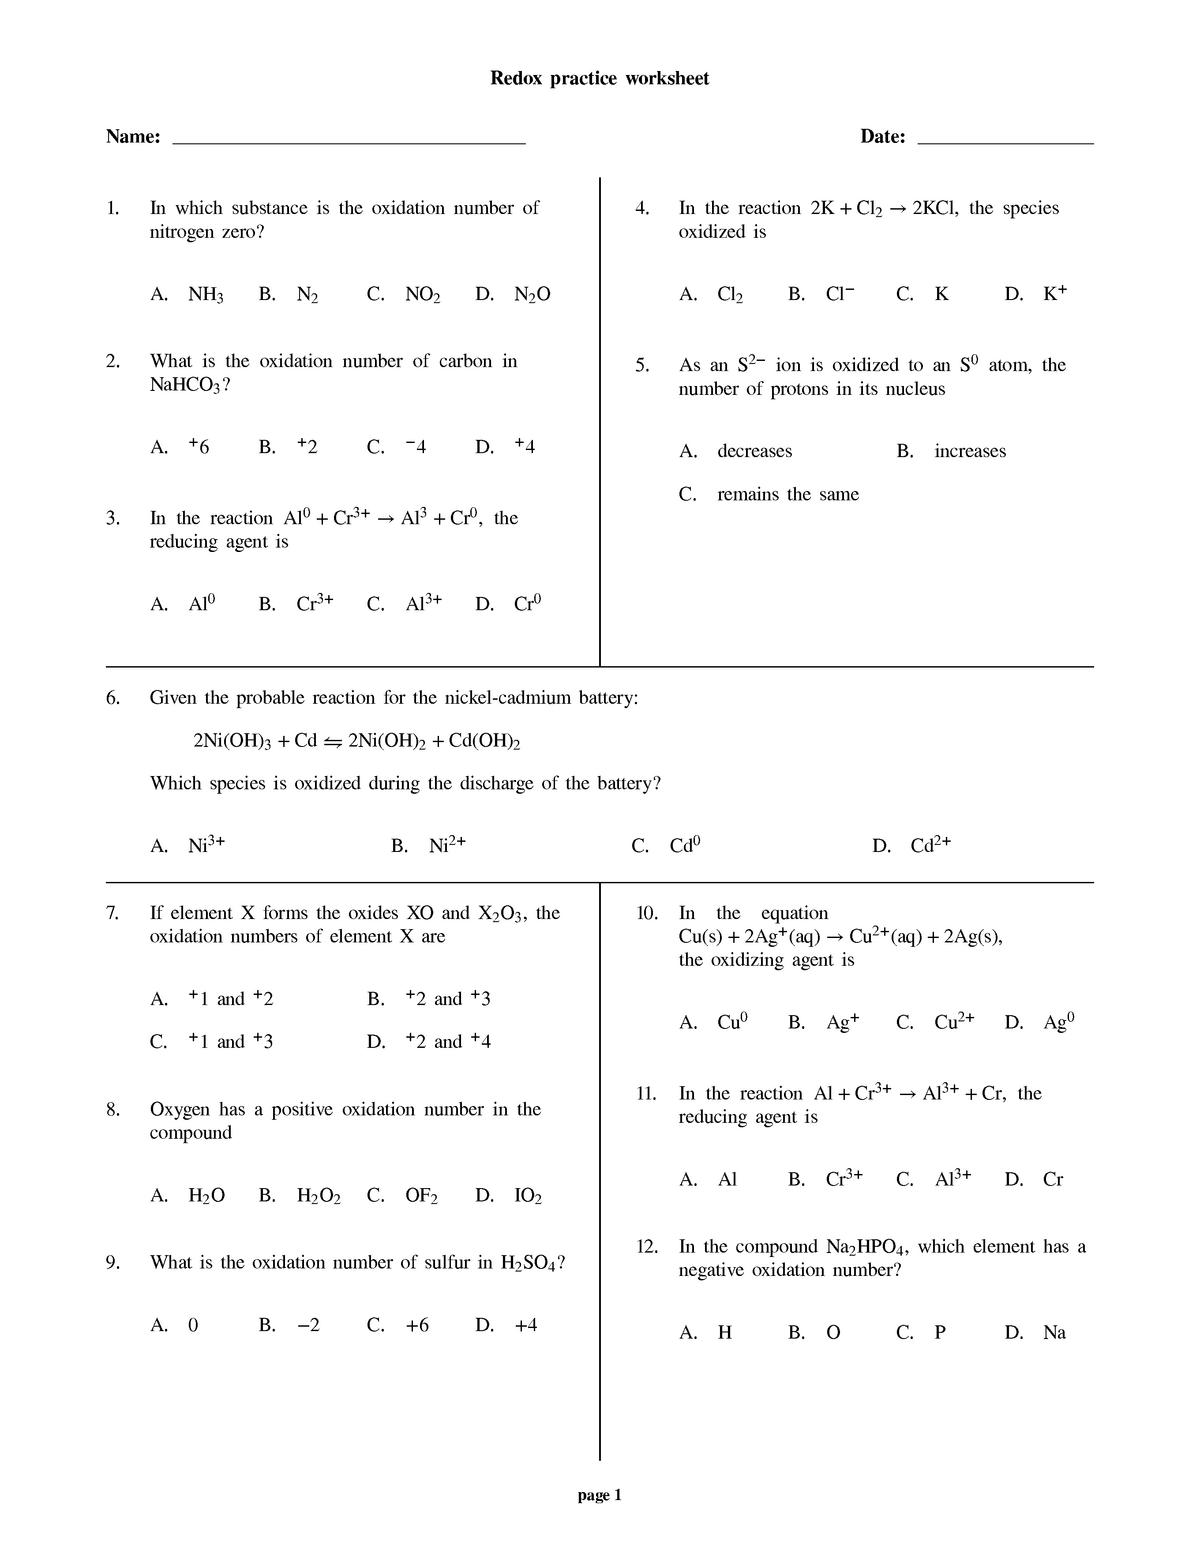 Redox reactions worksheet - CHEM 24 - General Chemistry I - Yale Throughout Oxidation Reduction Worksheet Answers